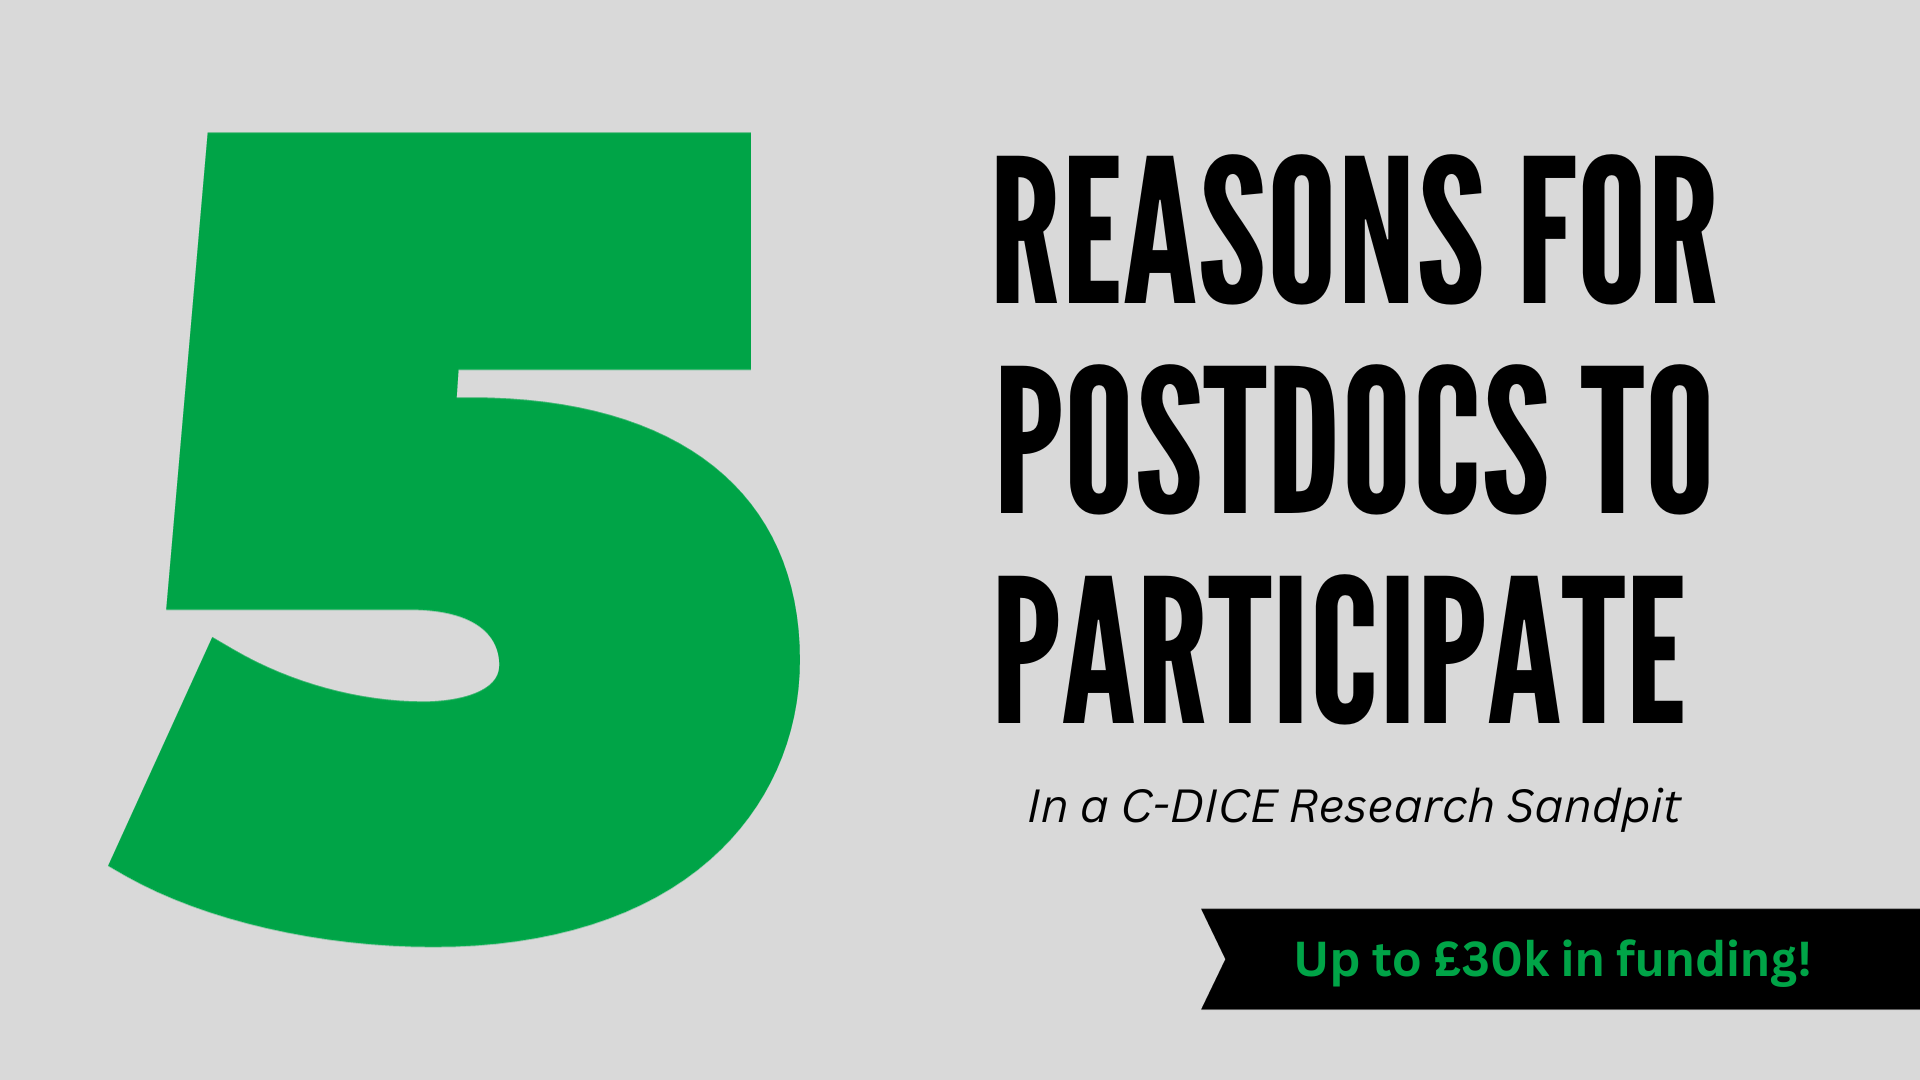 5 Reasons Why Postdocs Should Participate in a Research Sandpit